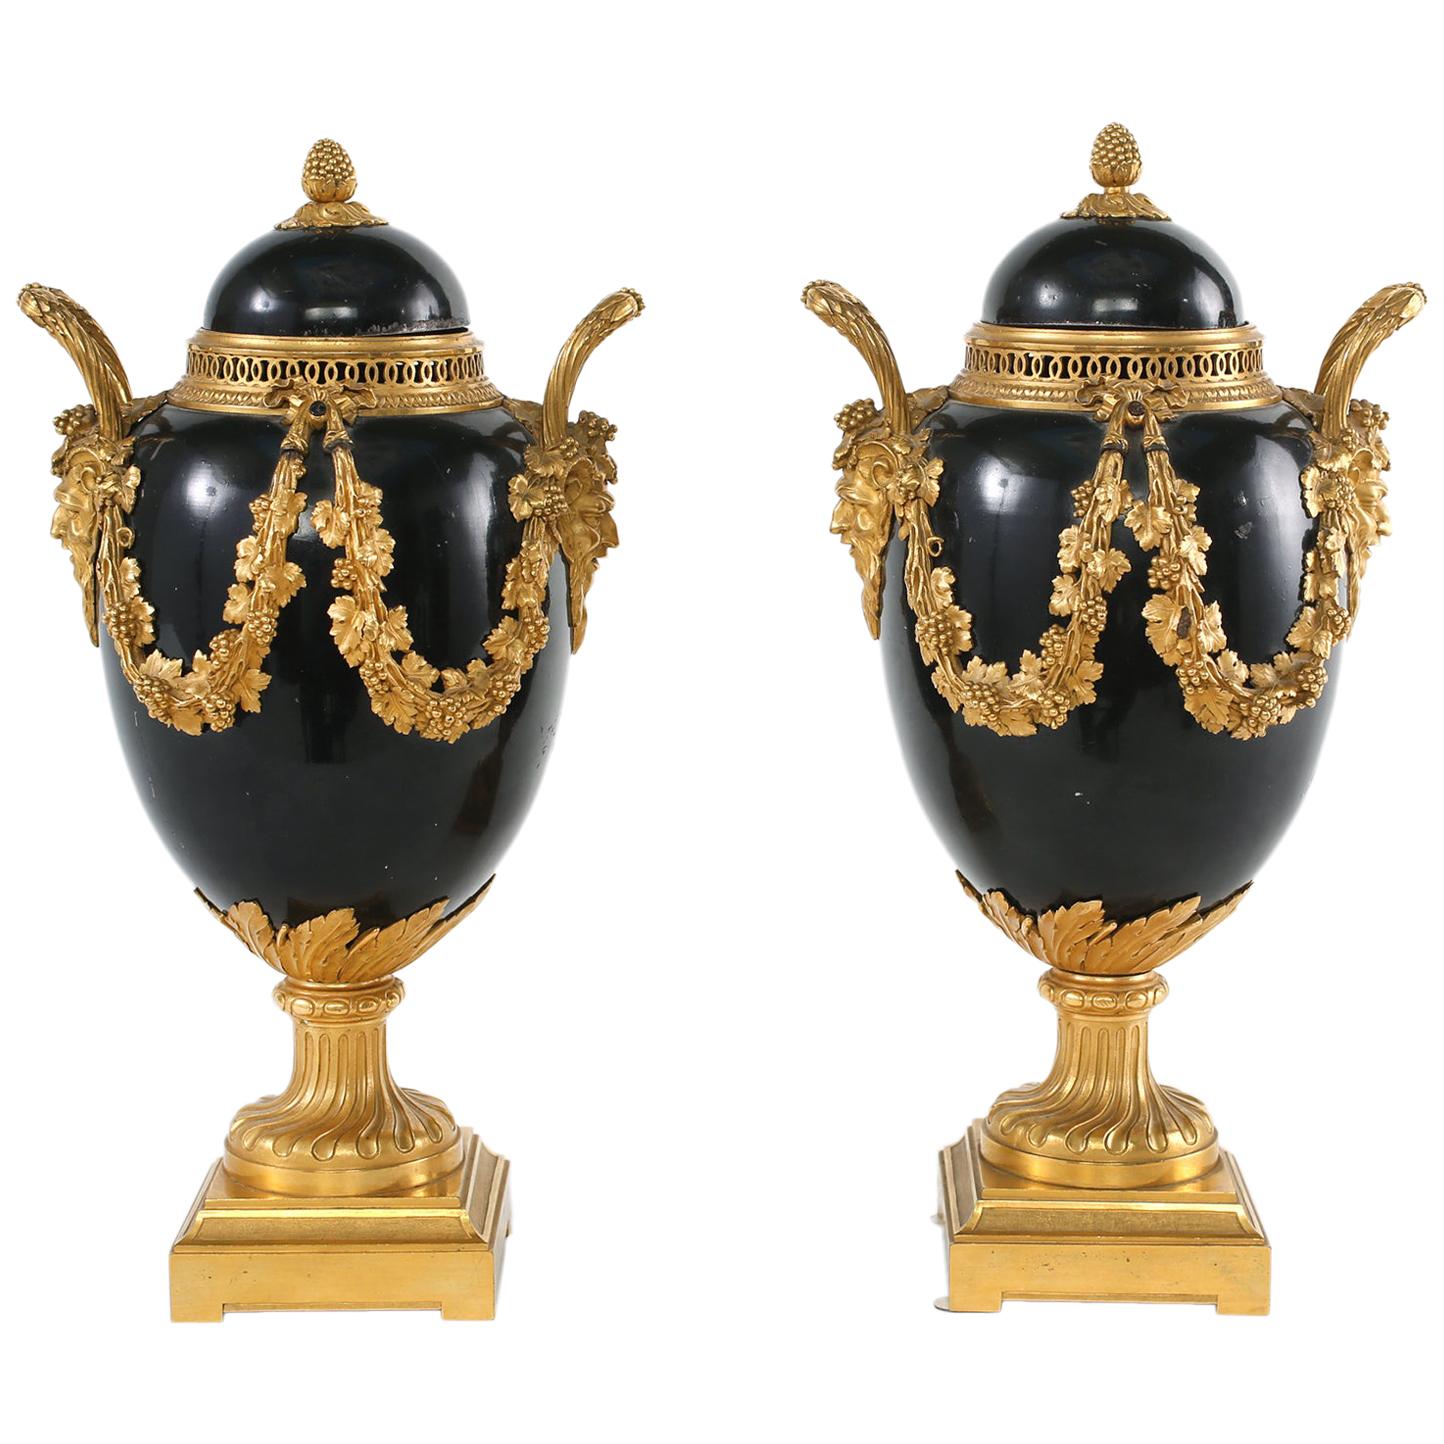 Pair Gilt Bronze Mounted Covered Decorative Urns